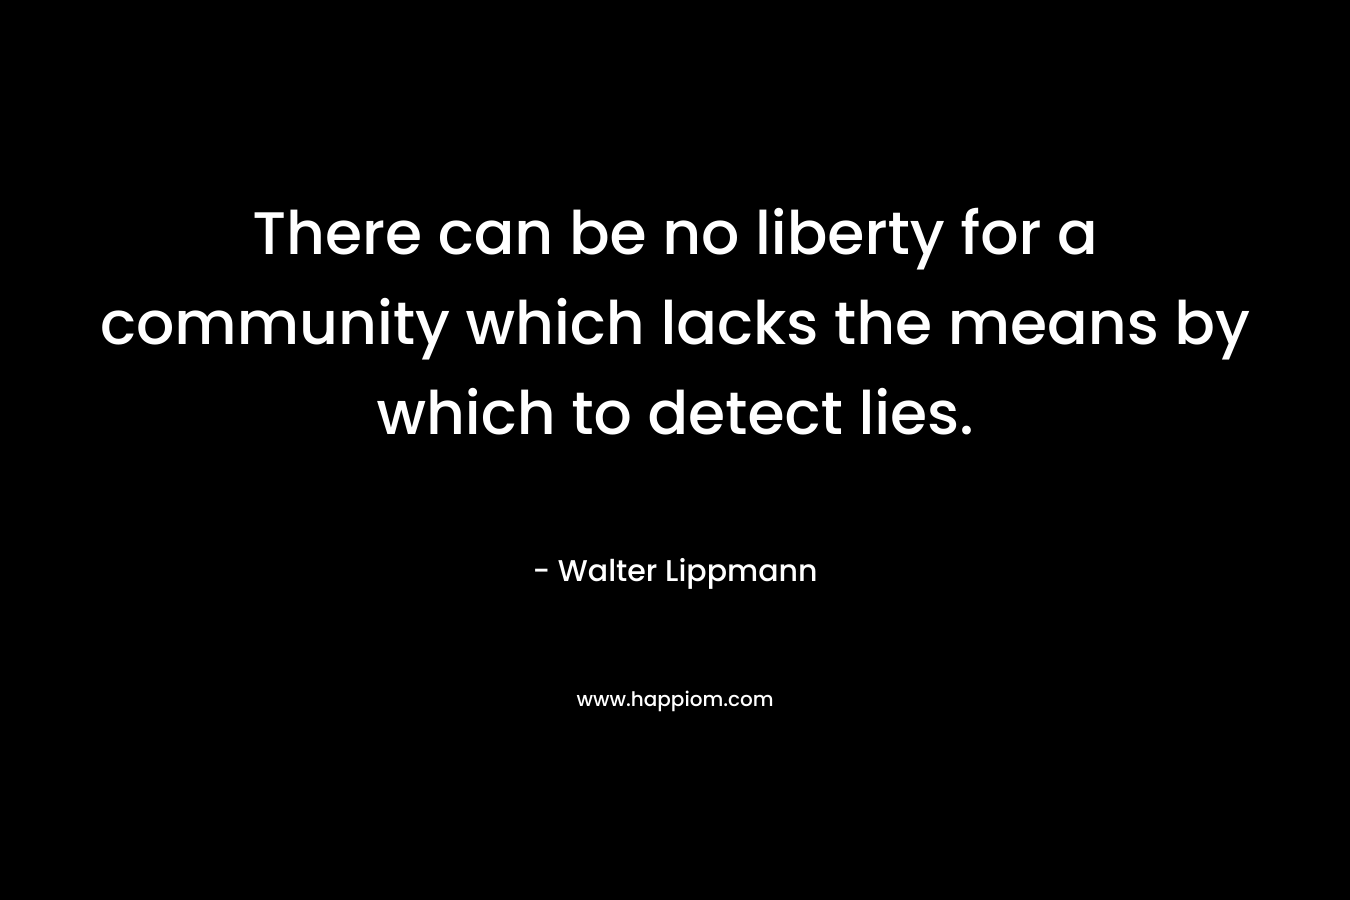 There can be no liberty for a community which lacks the means by which to detect lies. – Walter Lippmann